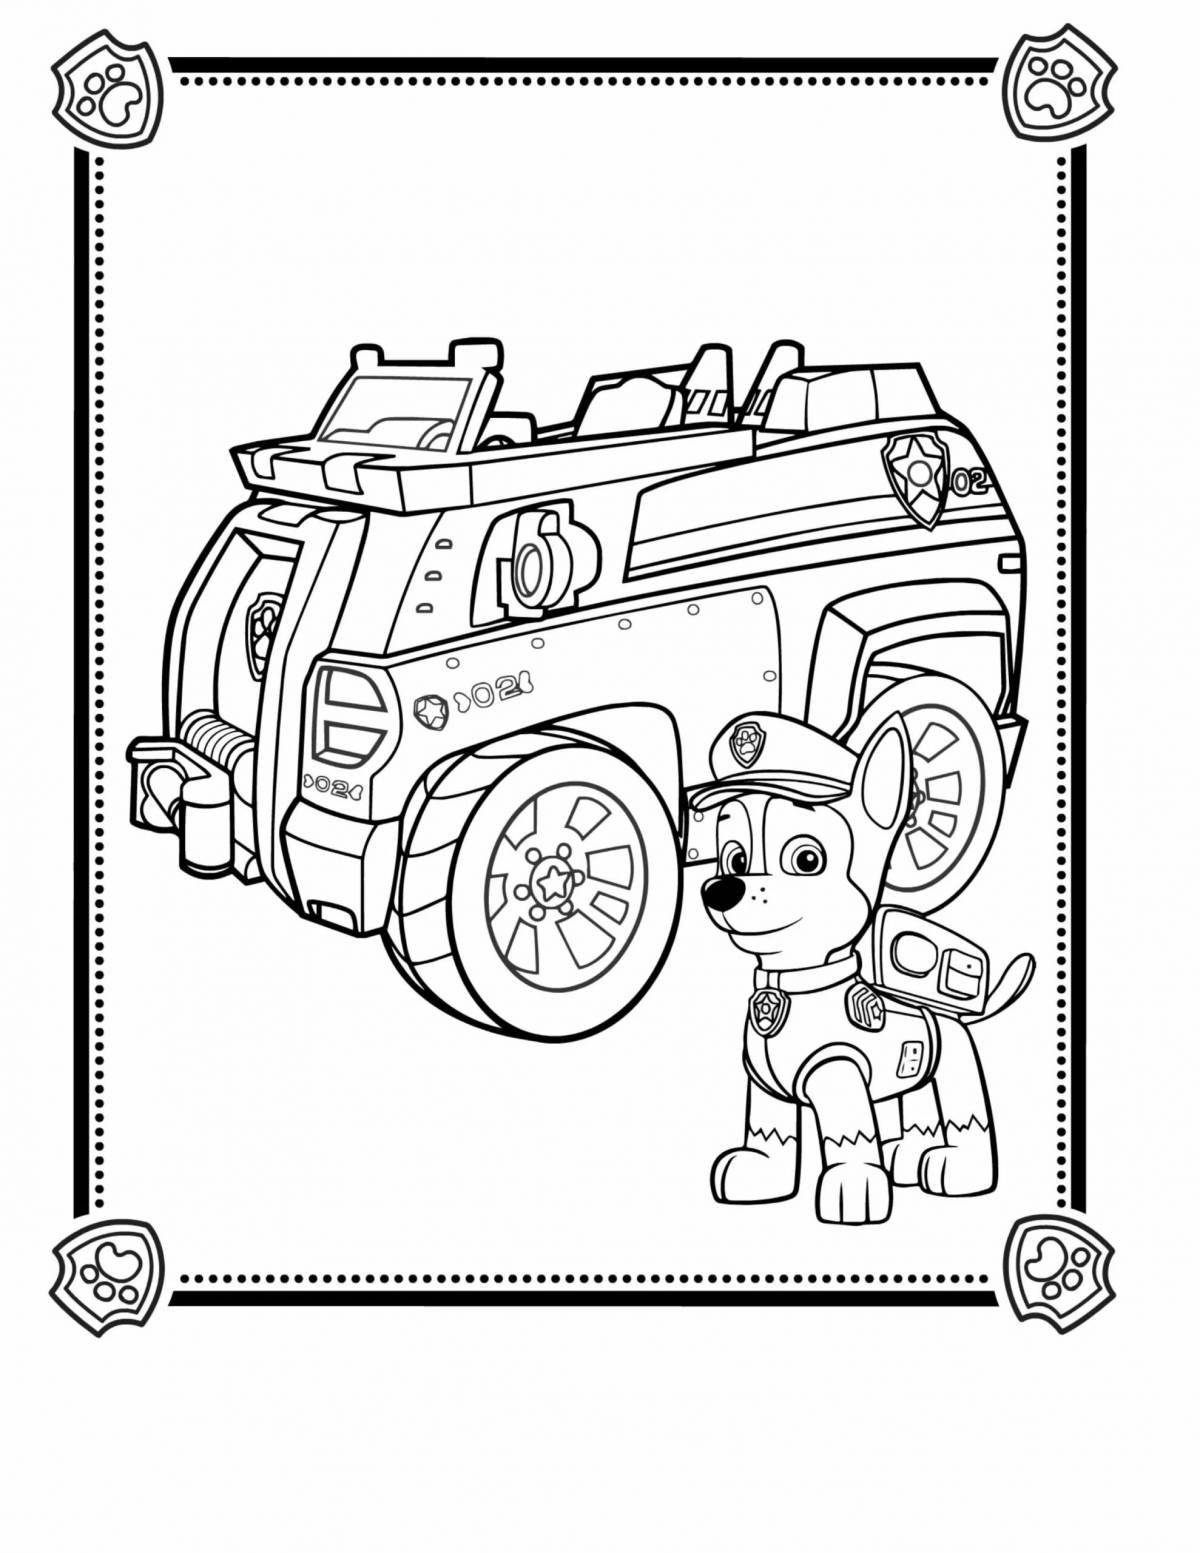 Paw patrol coloring book with cars